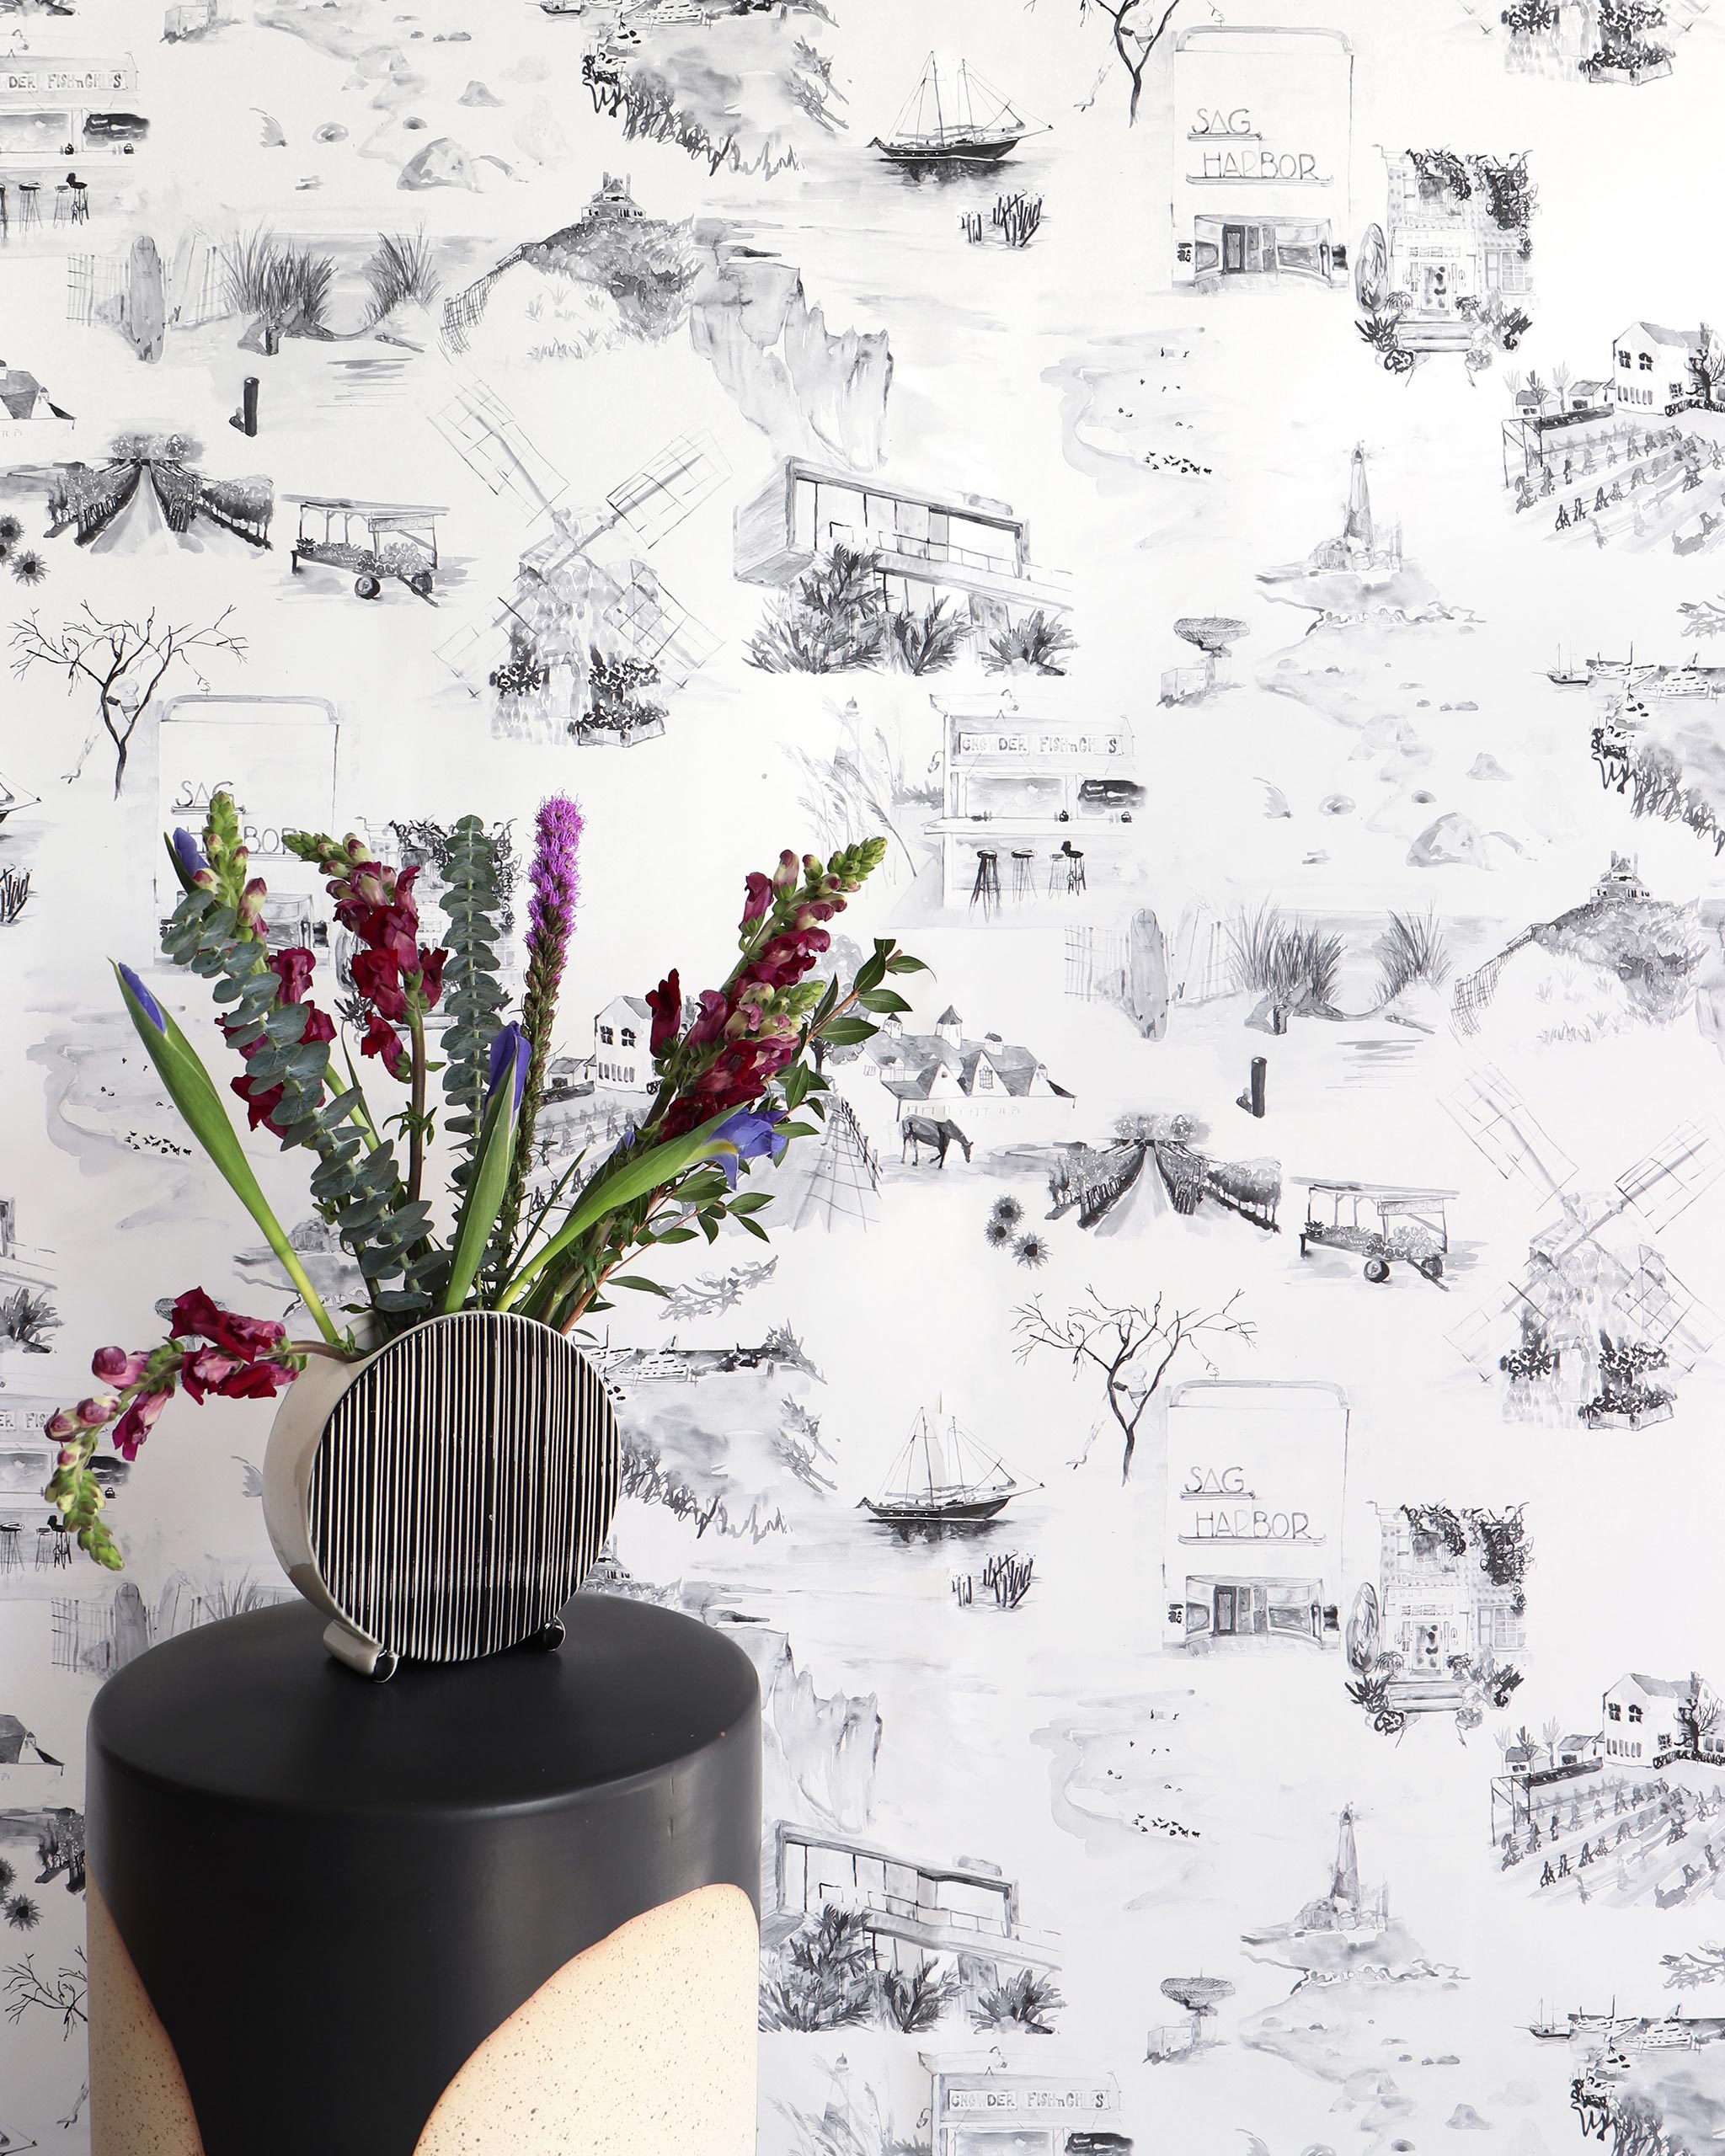 An end table with flowers stands in front of a wall papered in a playful illustrated city print in gray, black and white.